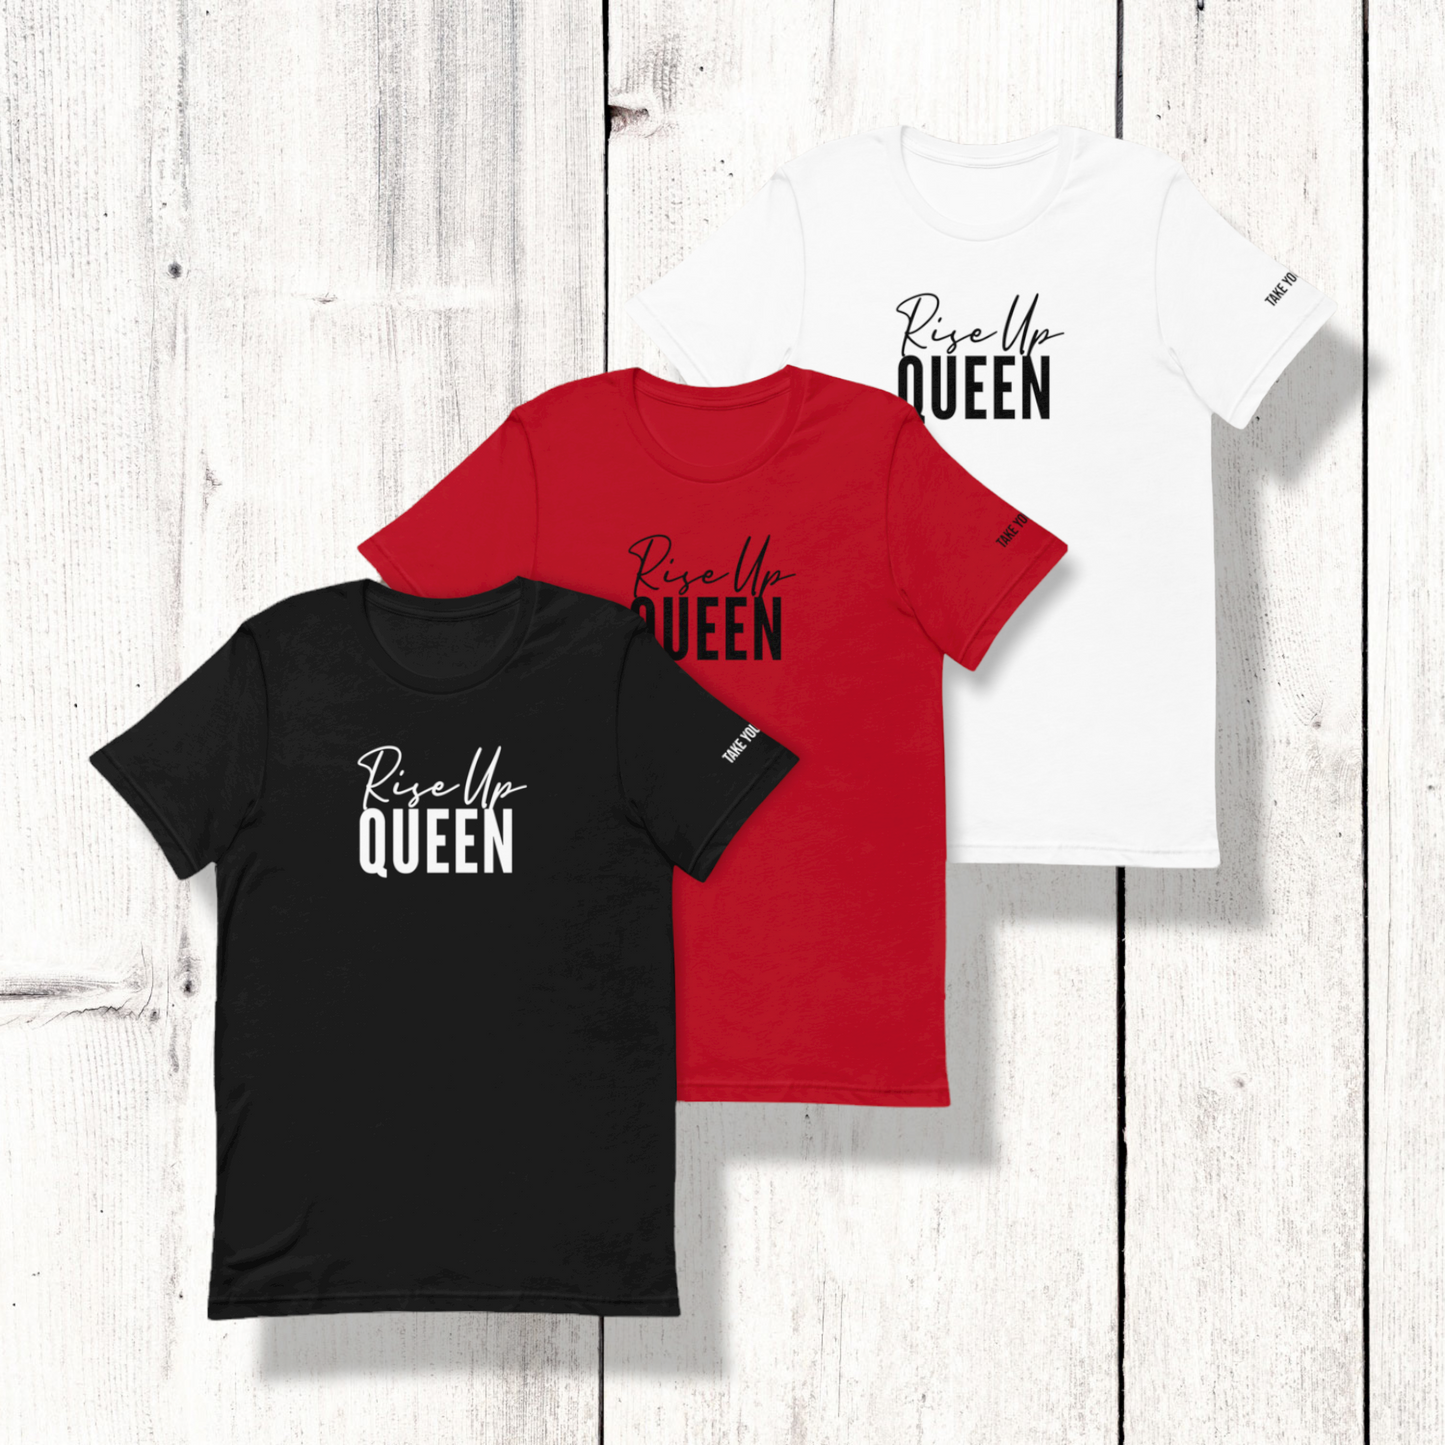 RISE UP QUEEN TEE